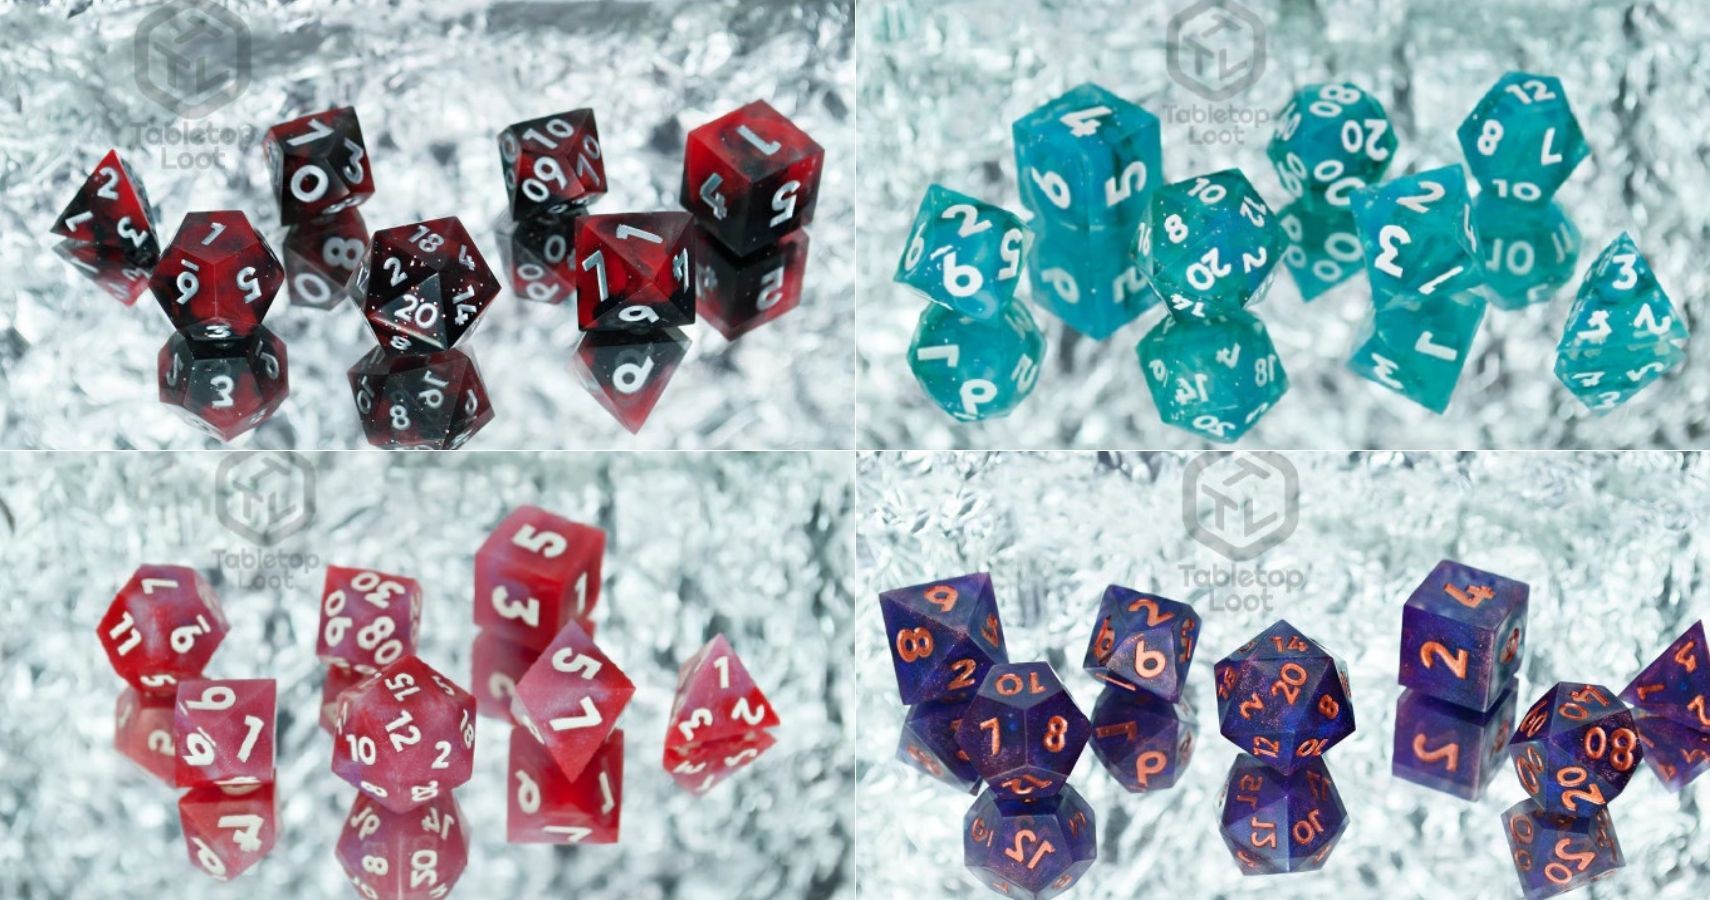 Tabletop Loot Astral Anomalies Kickstarter feature image